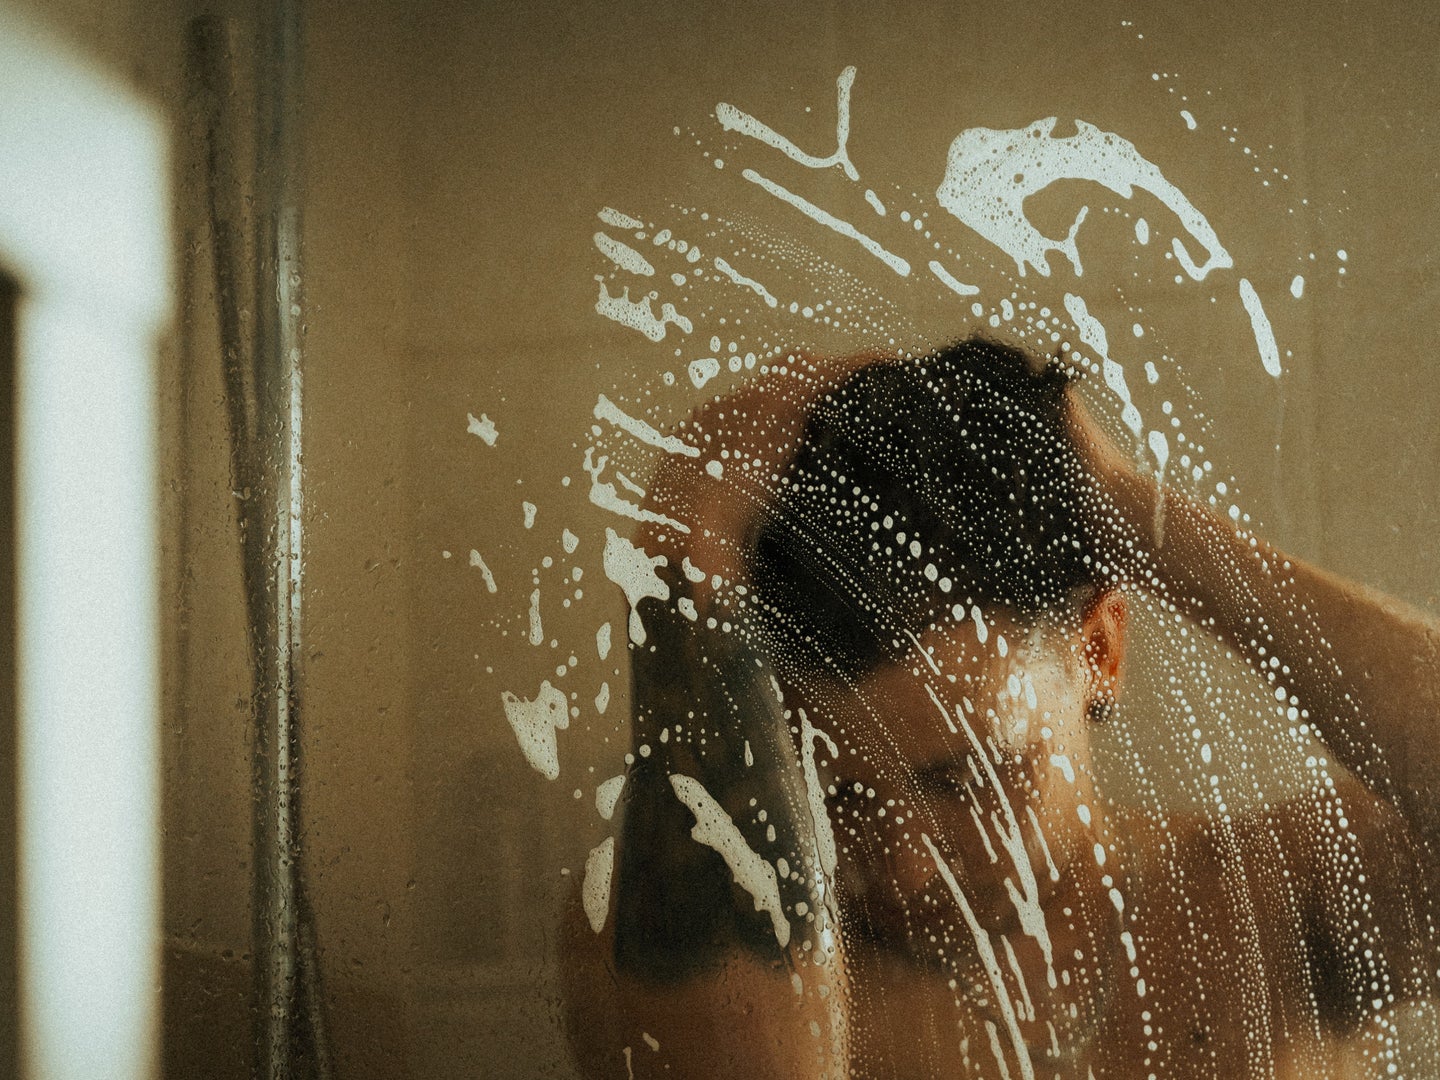 A person standing in a glass shower, washing their hair, with soap suds on the glass shower door.